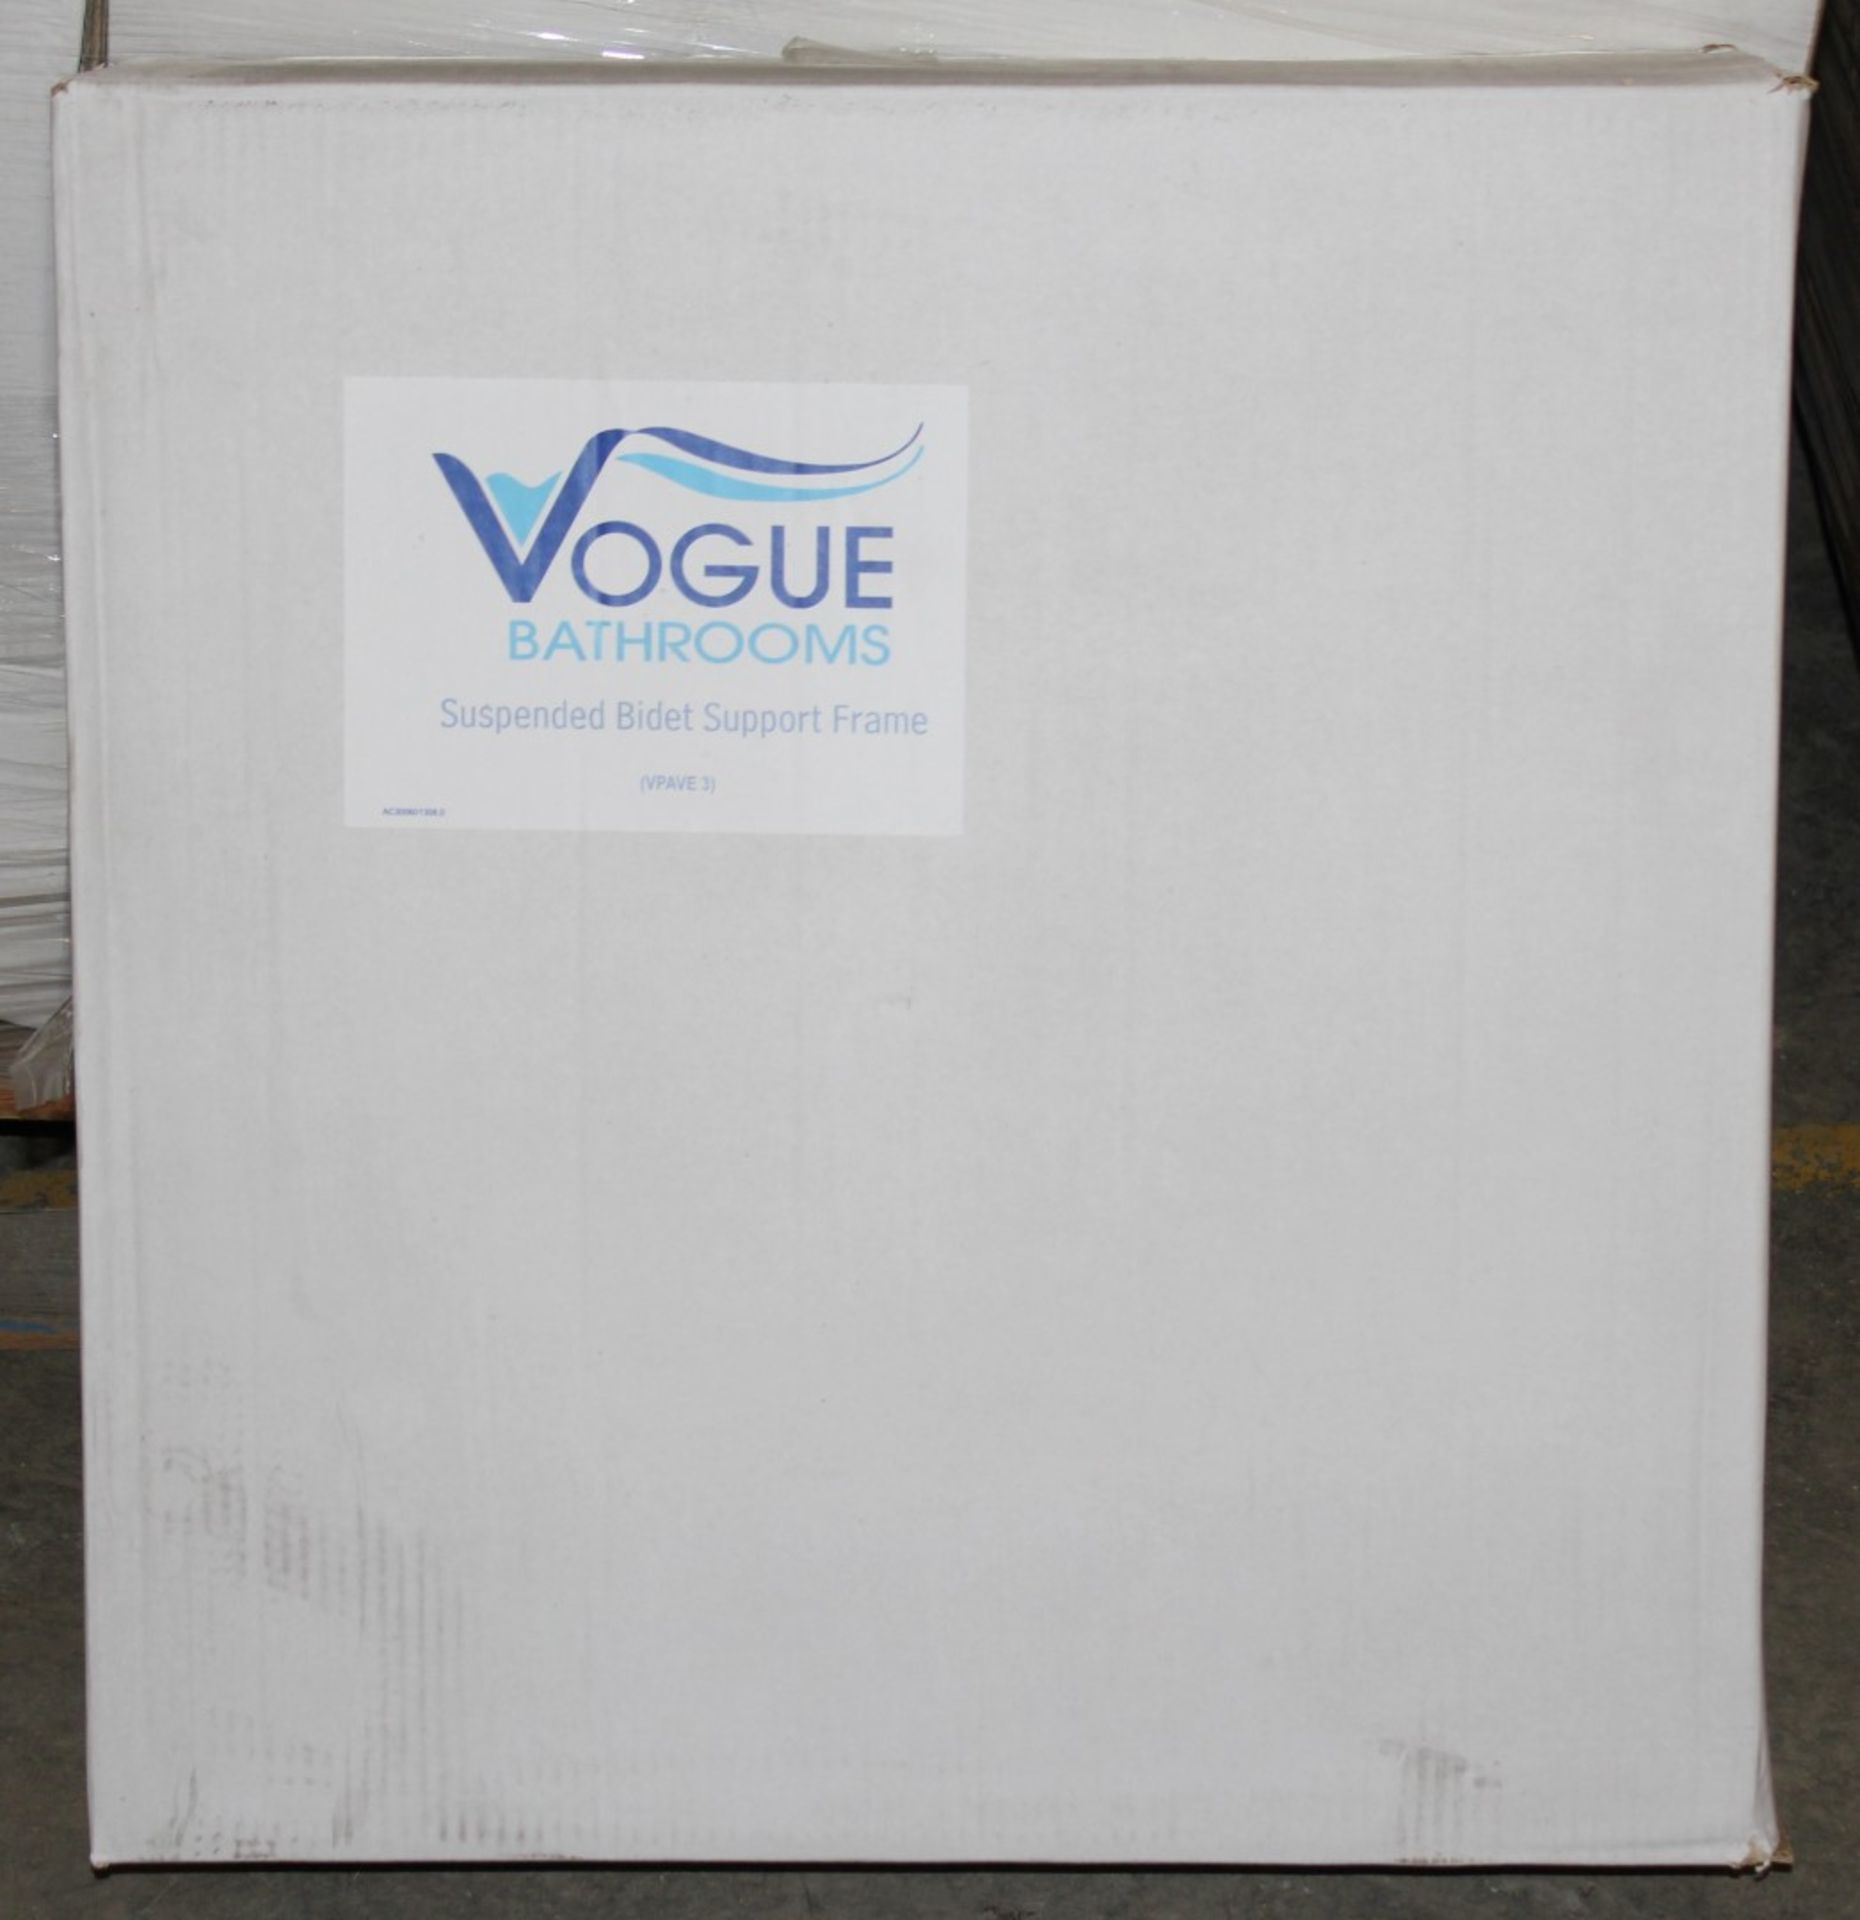 1 x Vogue Bathrooms Suspended Bidet Support Frame With Fittings - Type VPAVE3 - Brand New Boxed - Image 5 of 5